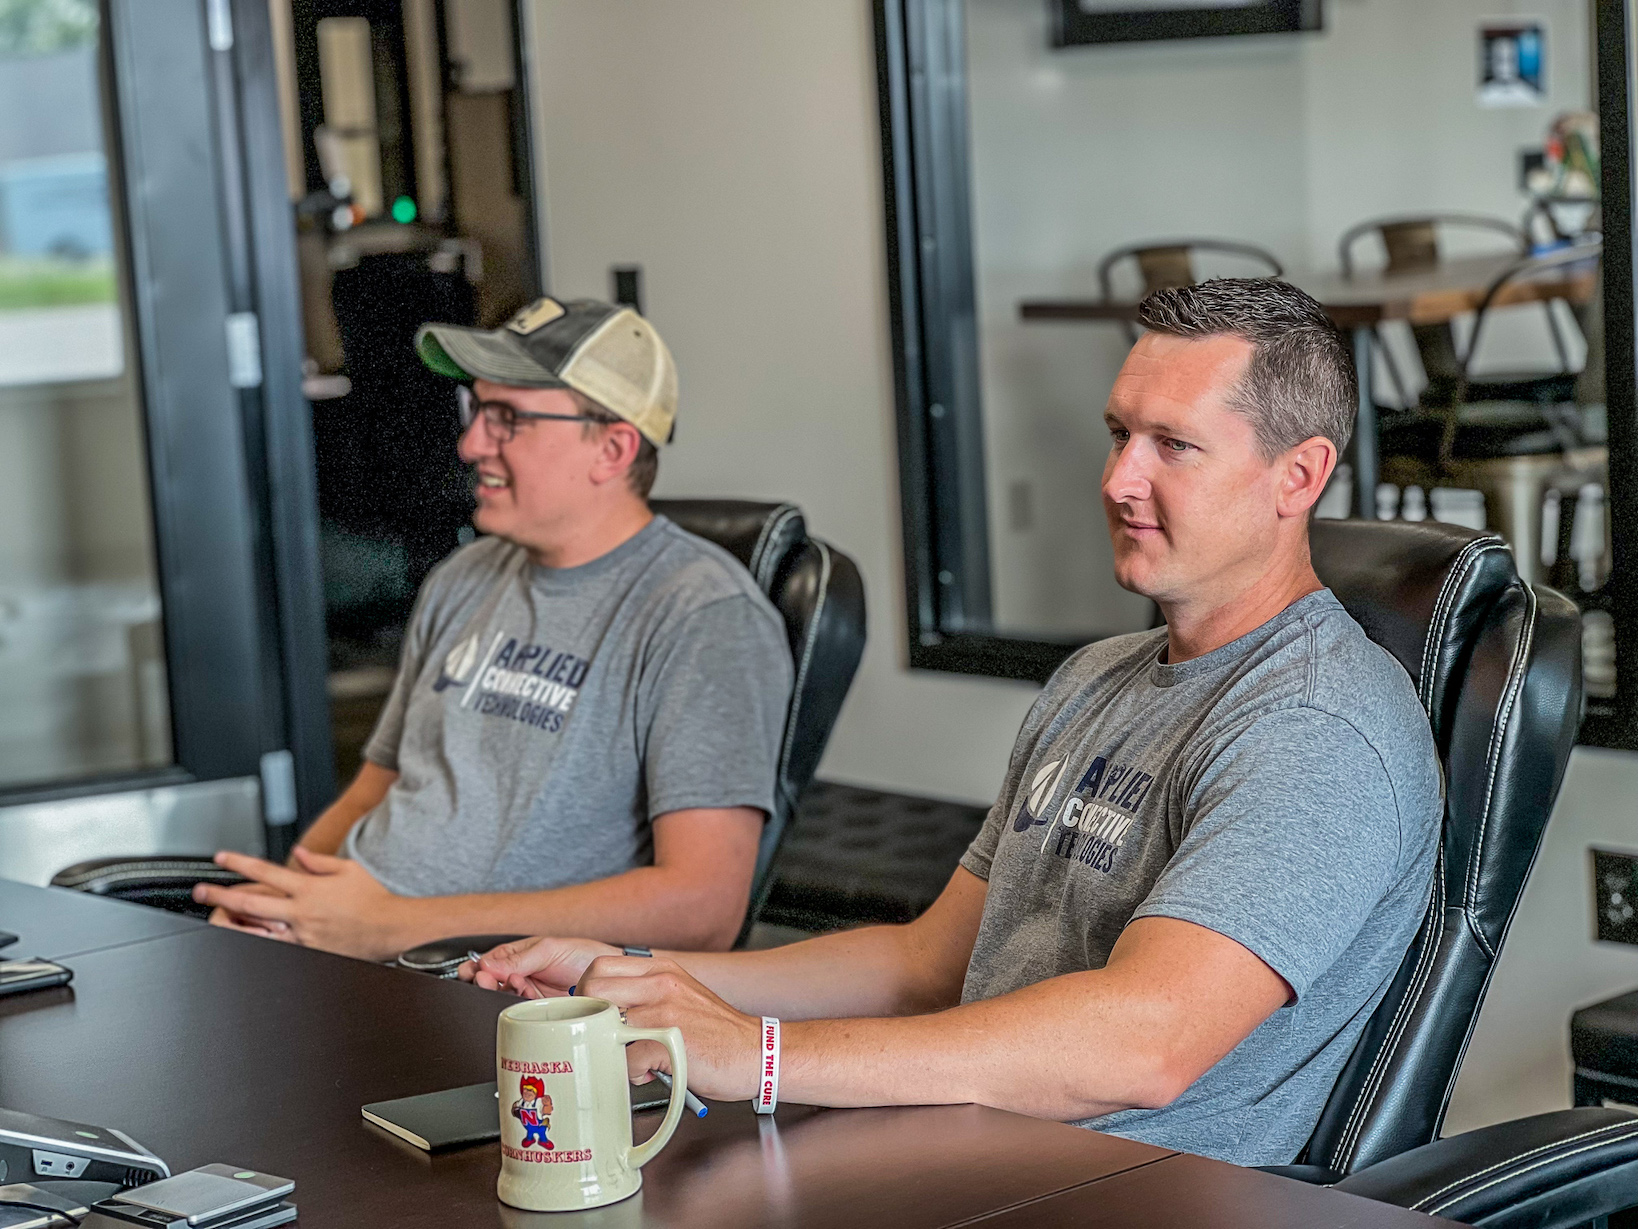 Relationship managers Matt Childress and Travis Petsche talking in conference room of Applied Connective Technologies